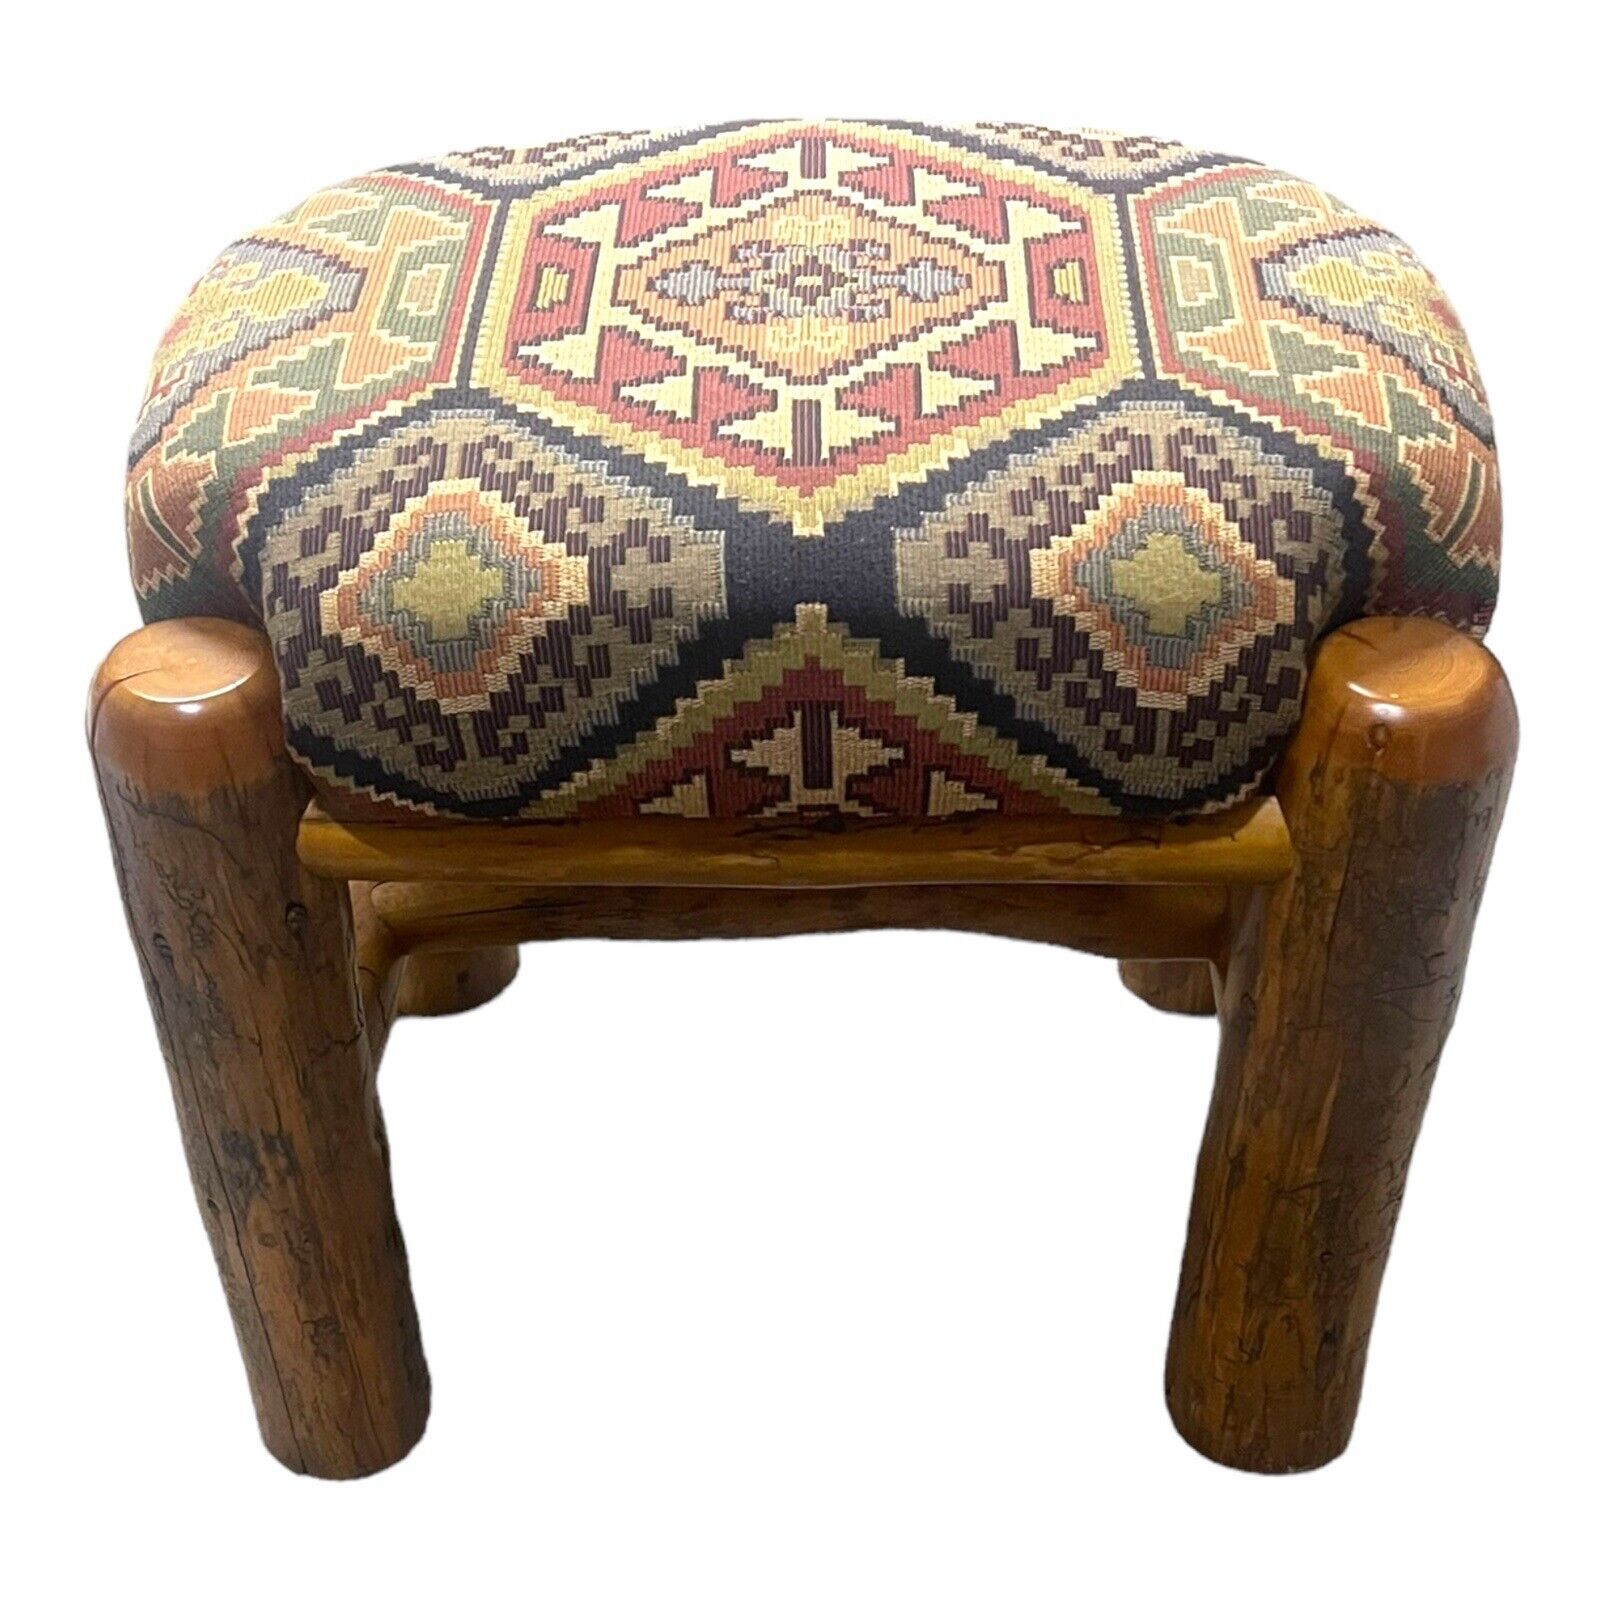 Navajo Woven Tapestry Stool Ottoman Bench Chair 21\